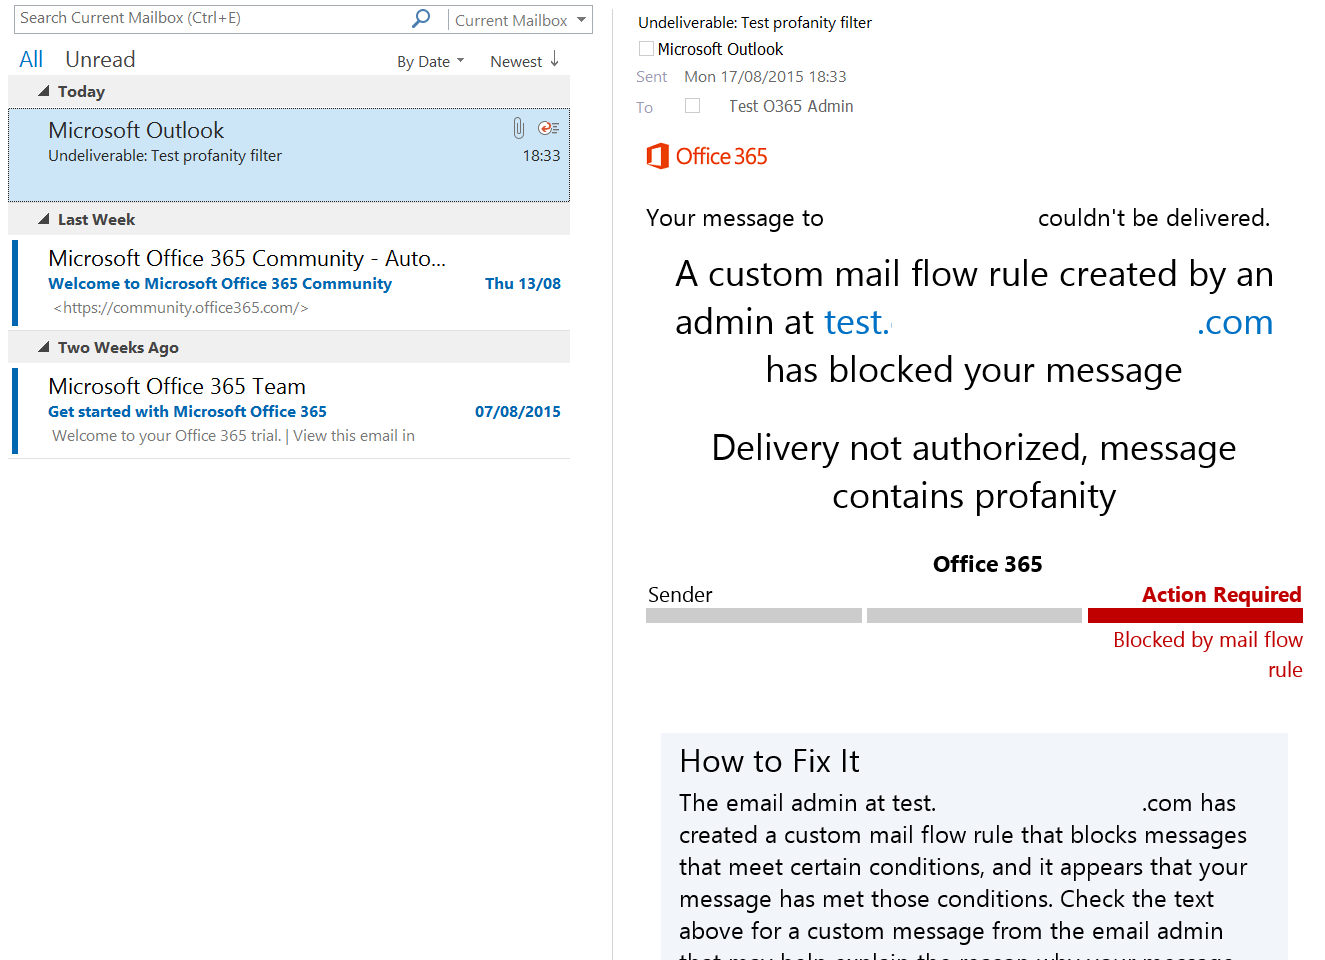 NDR from message blocked by Office 365 profanity filter